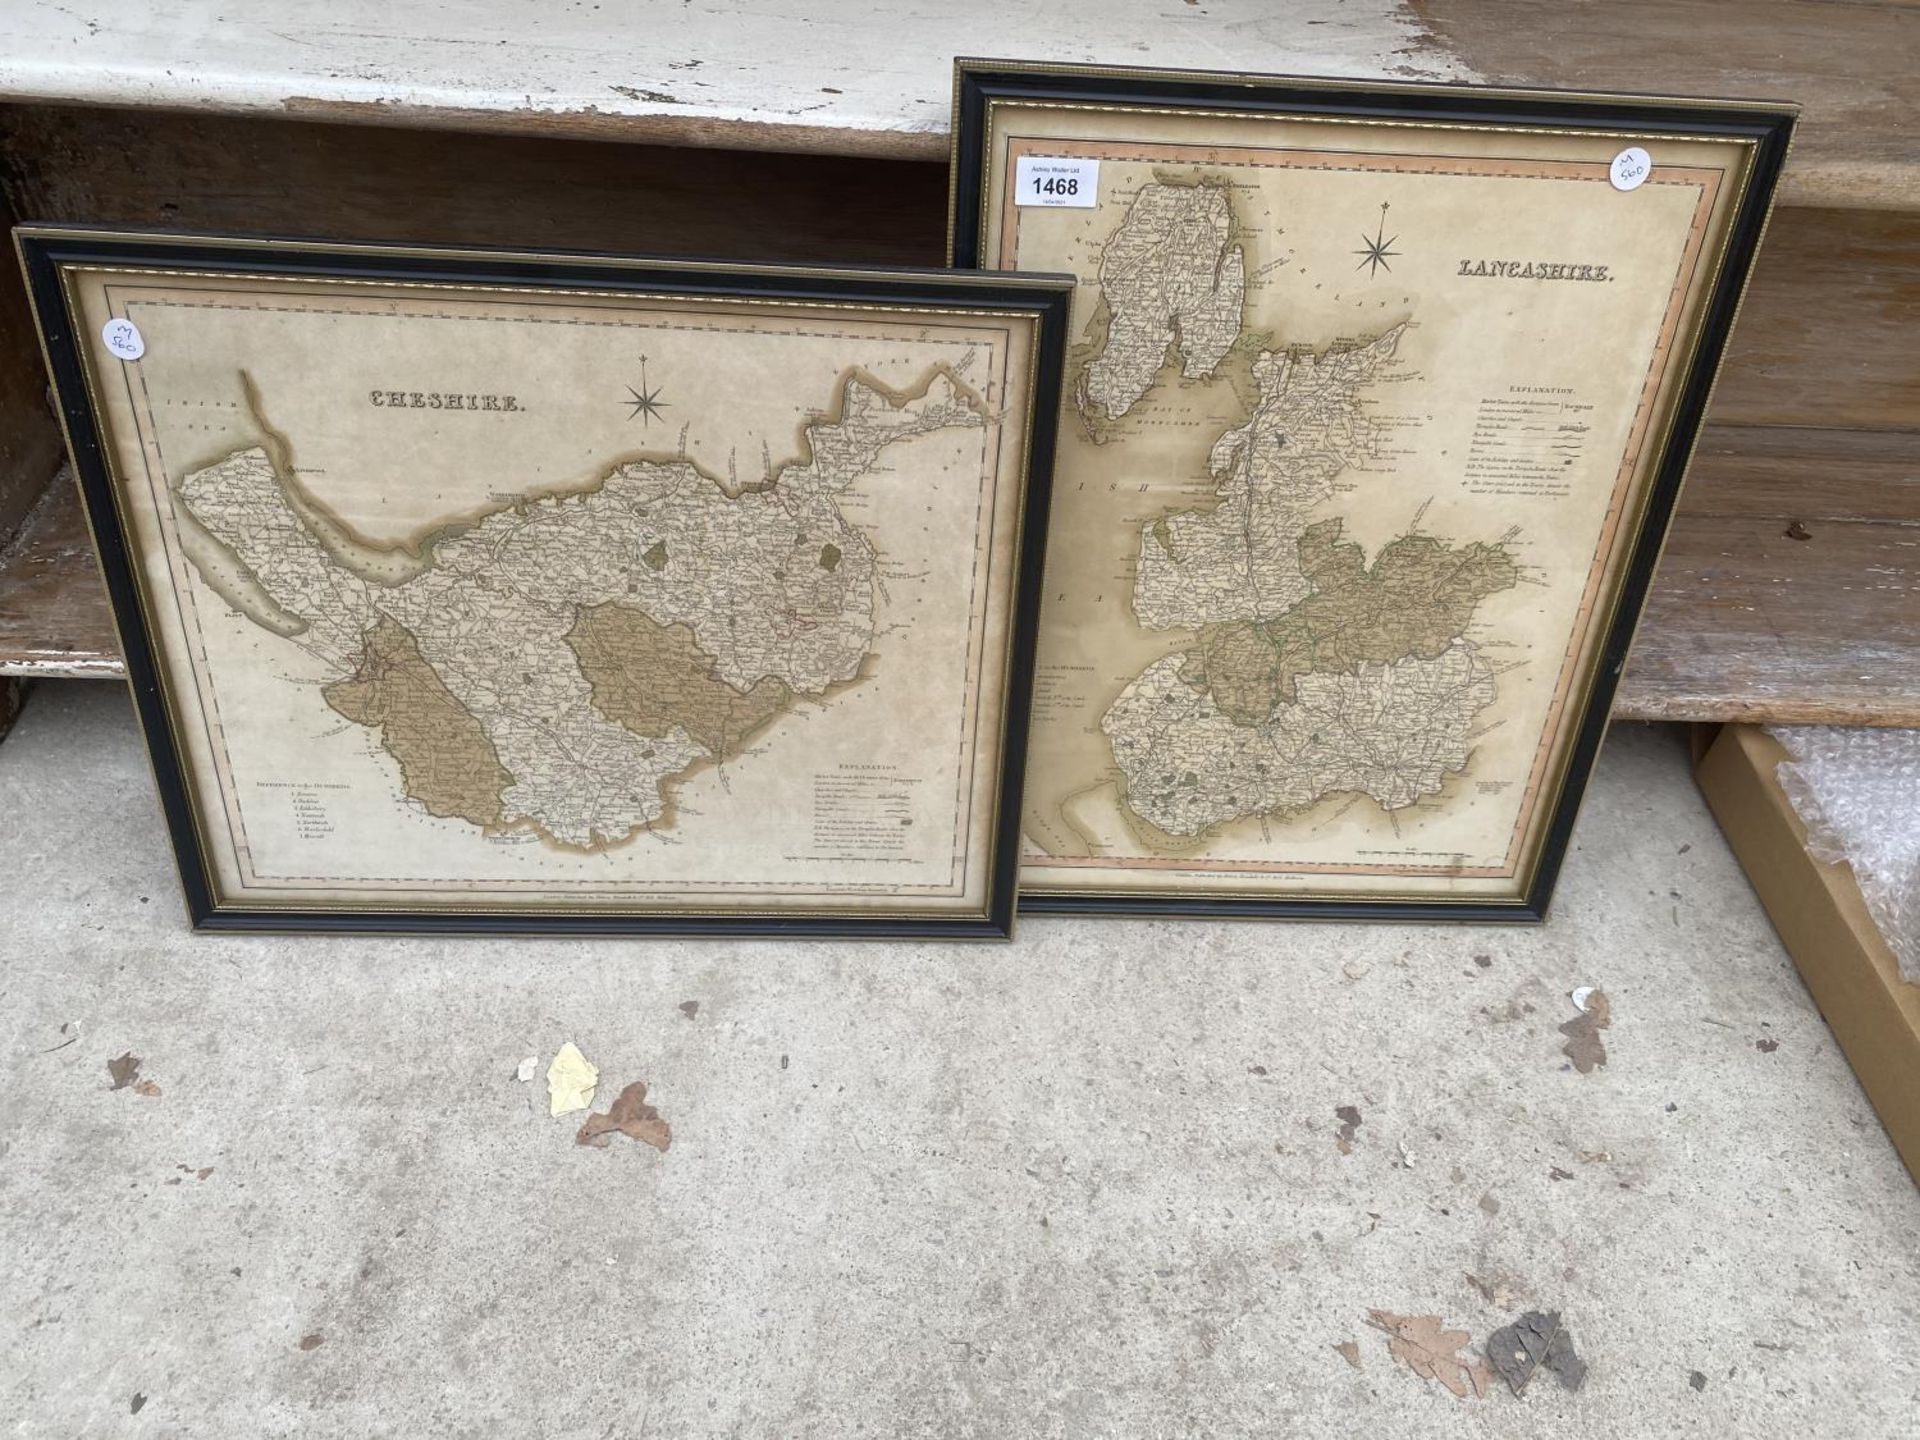 TWO FRAMED MAPS, ONE OF LANCASHIRE AND ONE OF CHESHIRE